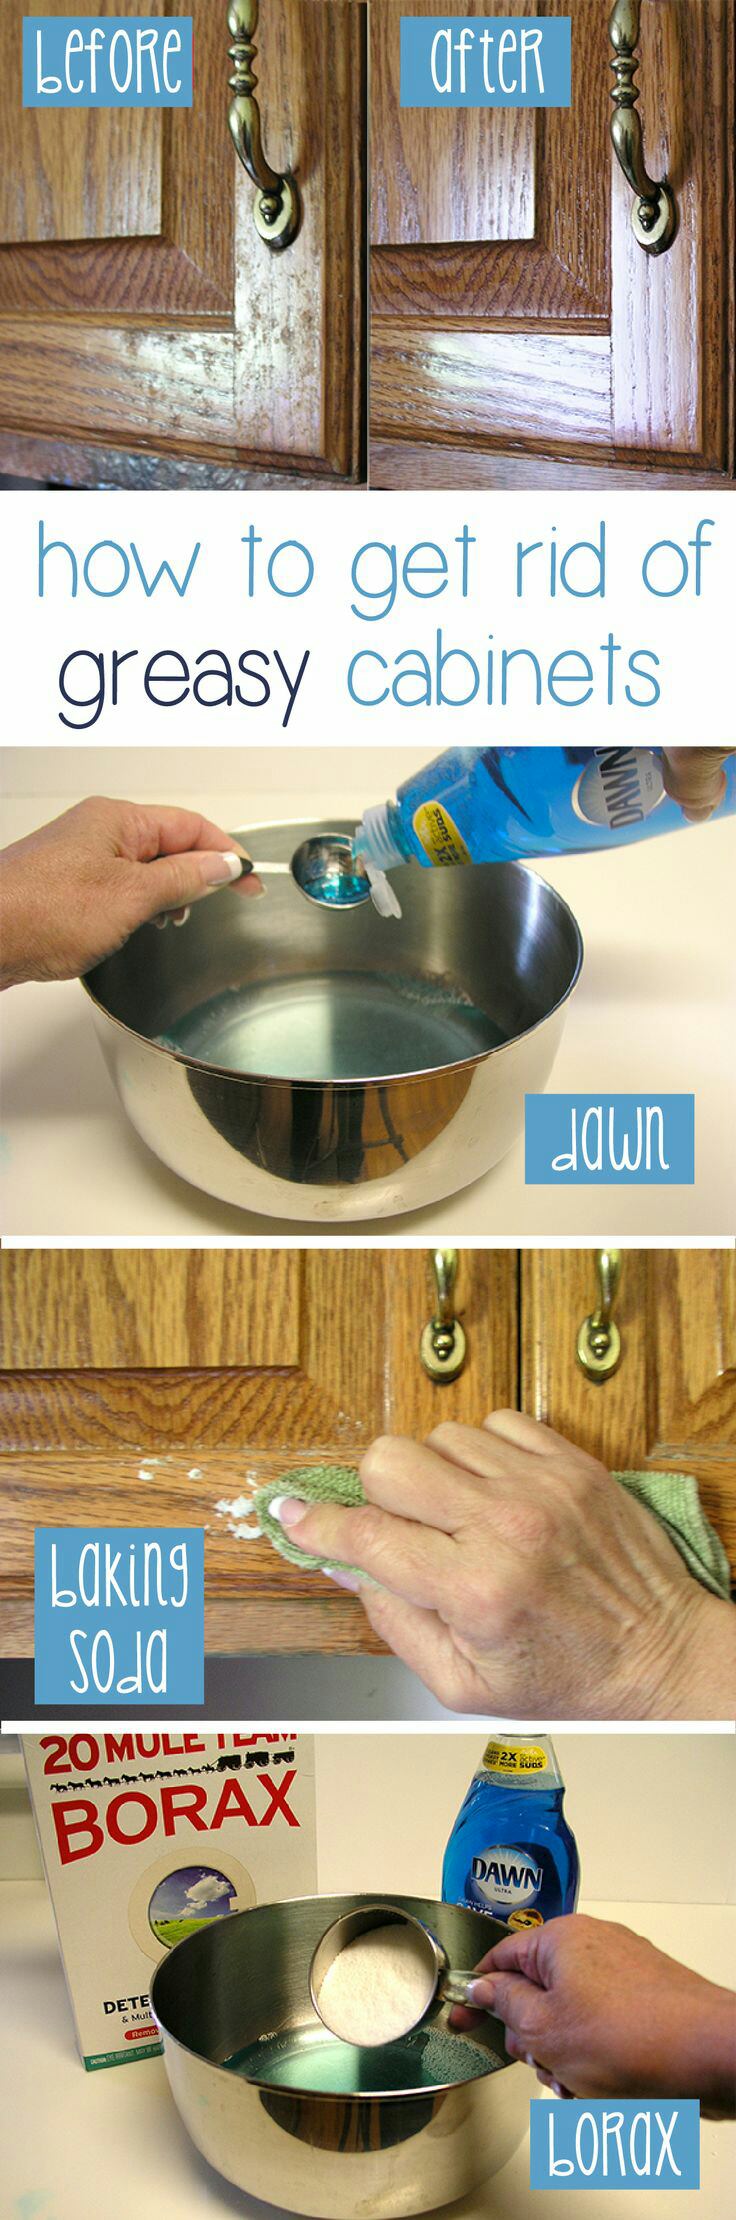 Cleaning kitchen cabinets is important, especially grease stains as they usually go unnoticed and grow gradually. In this post, you'll find easy ways to clean grease from kitchen cabinets.